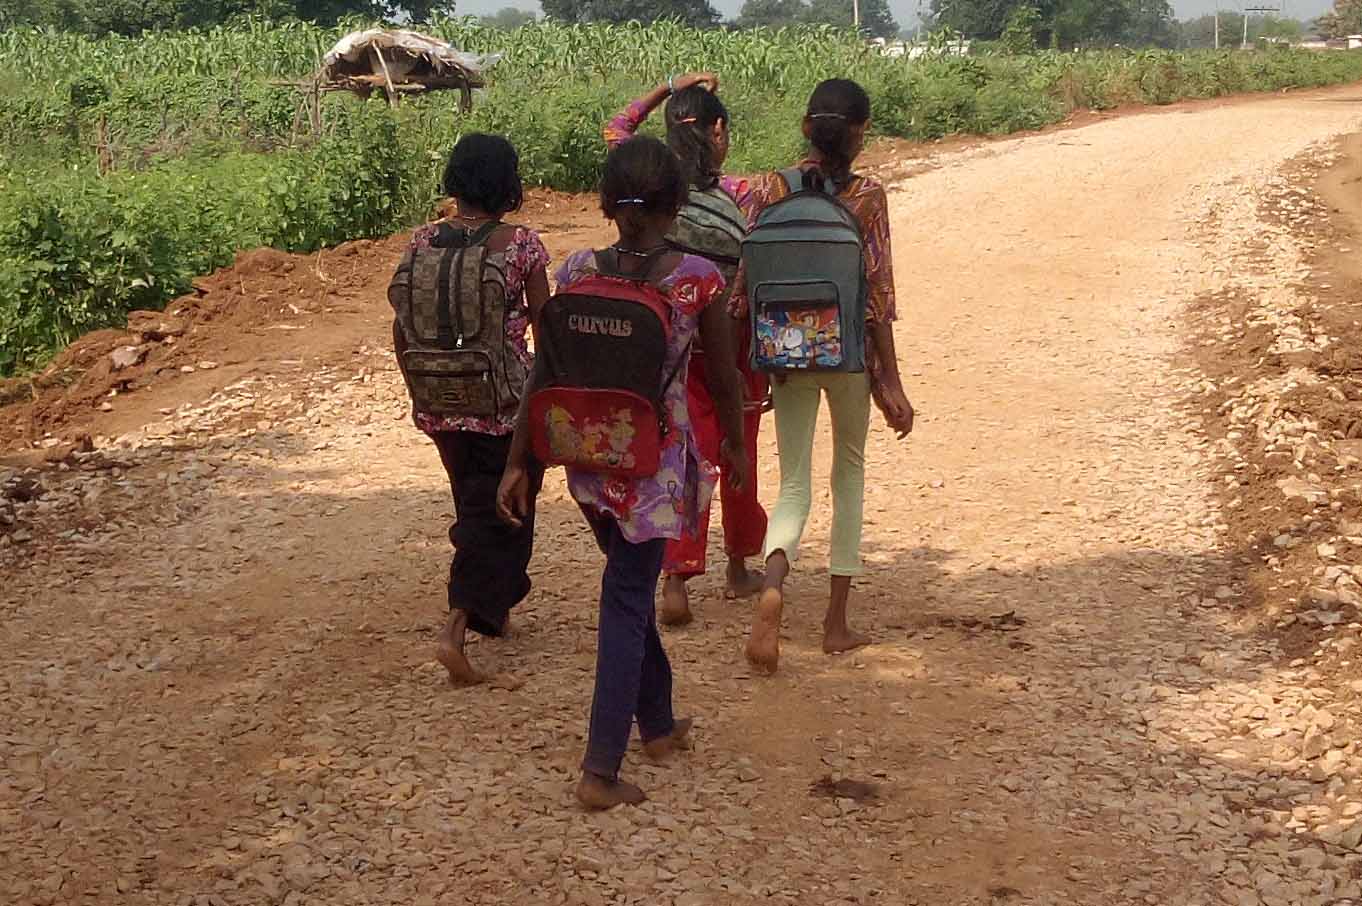 Students walking four km barefoot Such gossip of reading